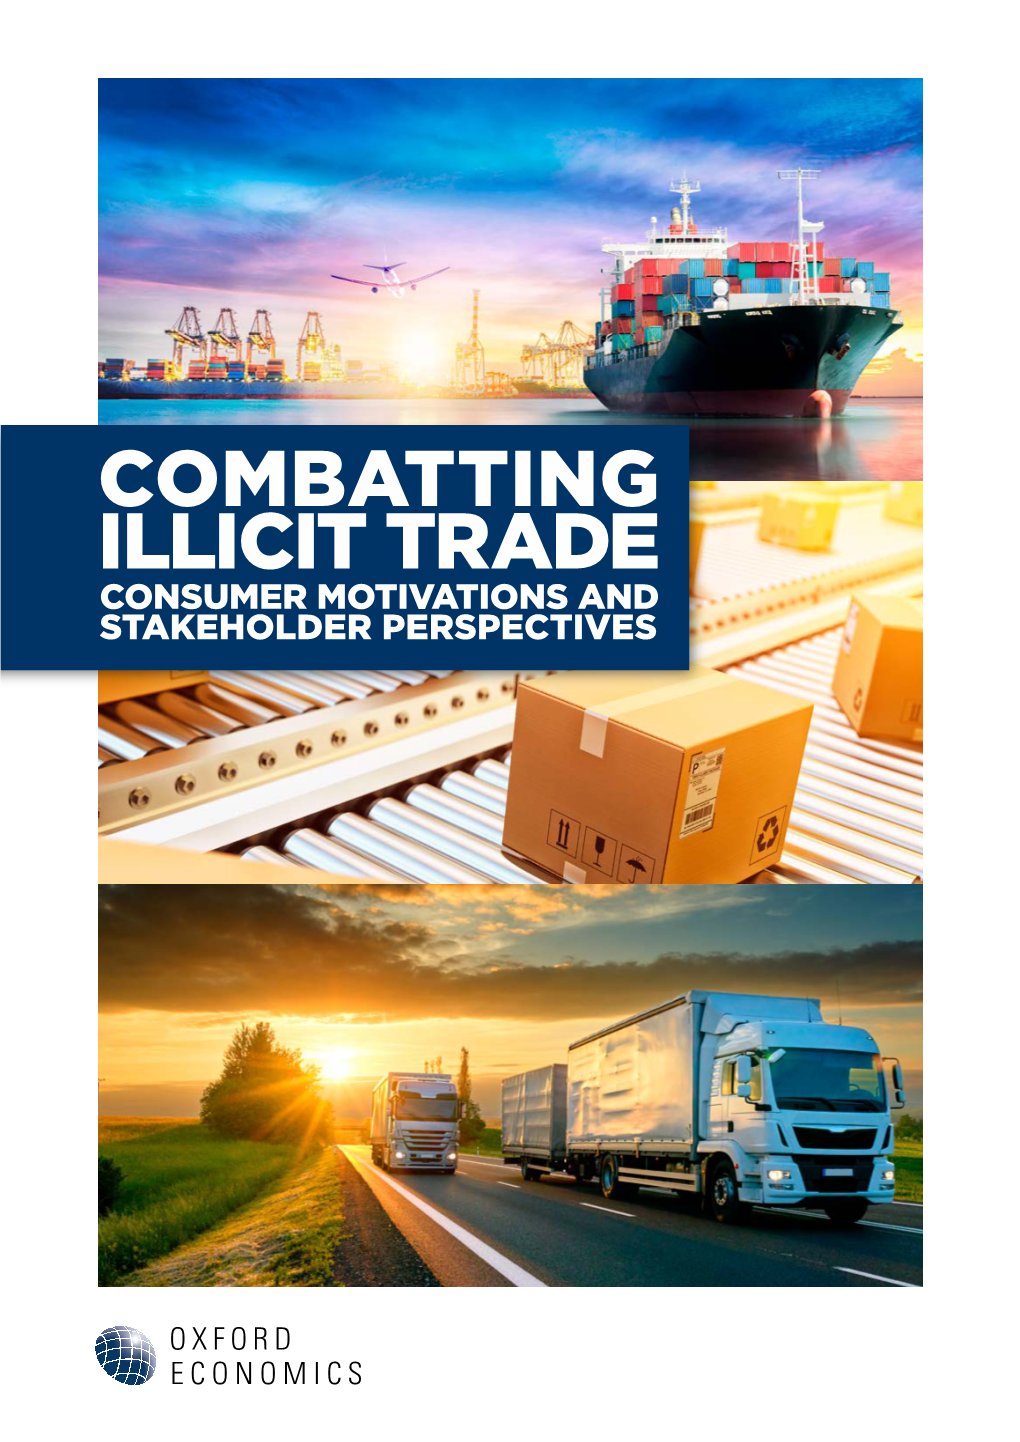 Combatting Illicit Trade Consumer Motivations and Stakeholder Perspectives